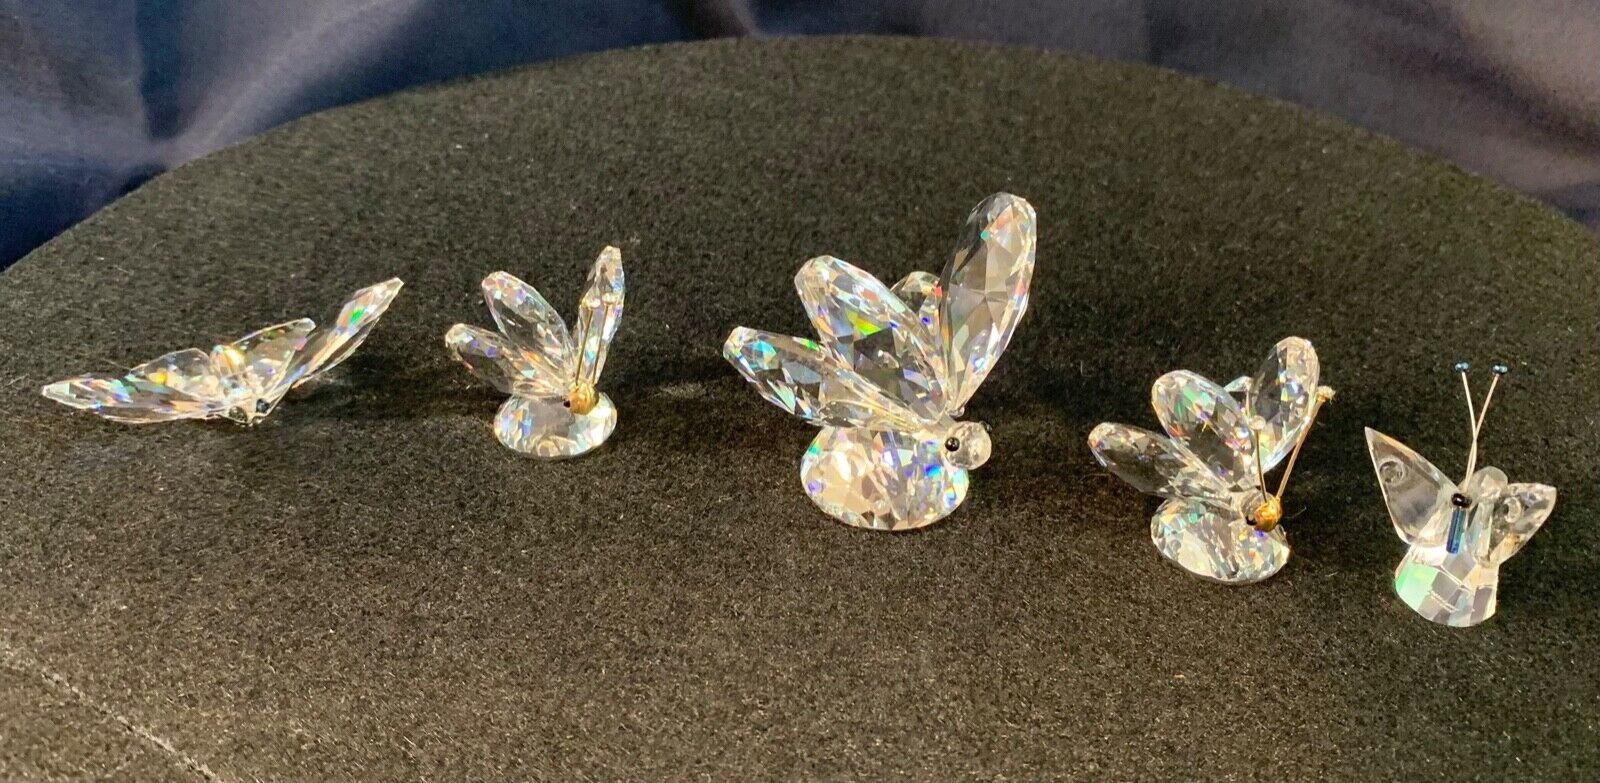 Lot of 5 Crystal Butterfly Figurines, most if not all are Swarovski.